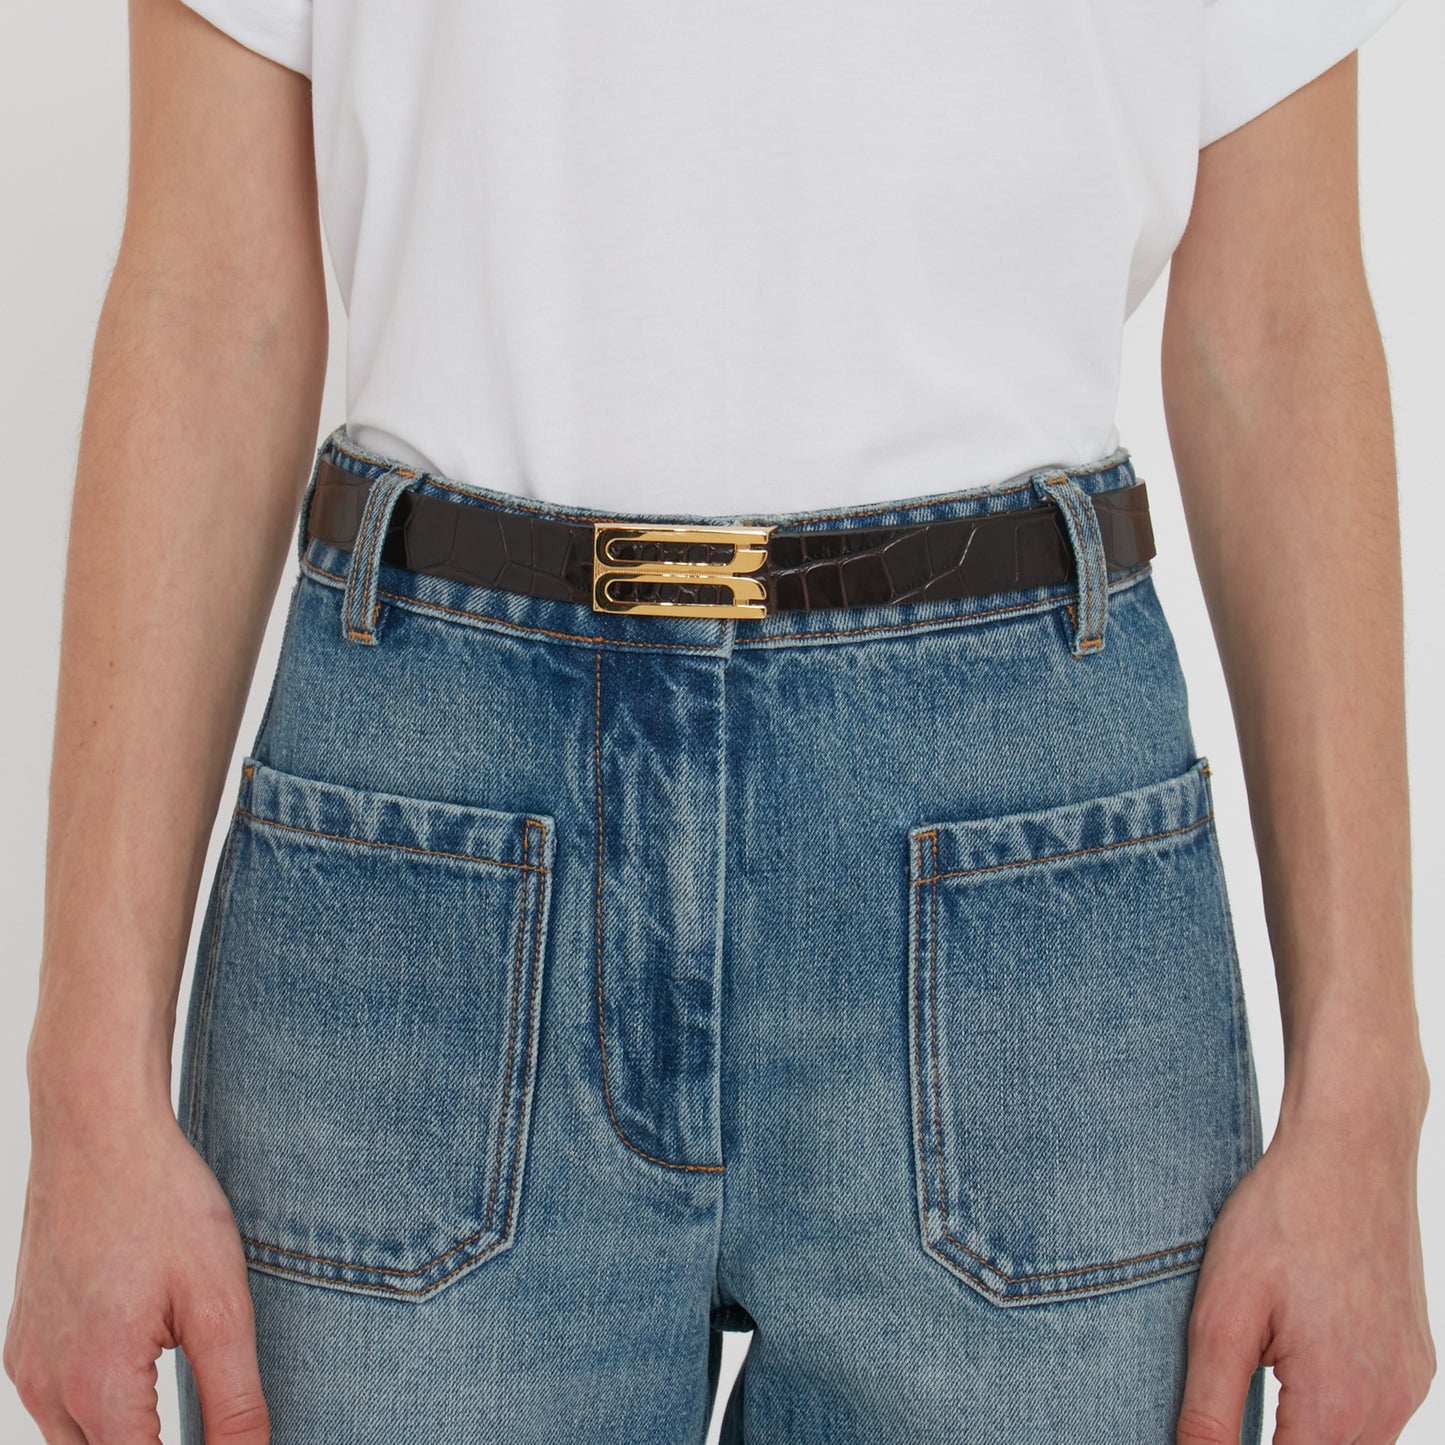 A person wearing a white shirt is shown from the waist down, dressed in high-waisted blue jeans with large front pockets and a Victoria Beckham Frame Belt In Espresso Croc Embossed Calf Leather adorned with gold hardware.